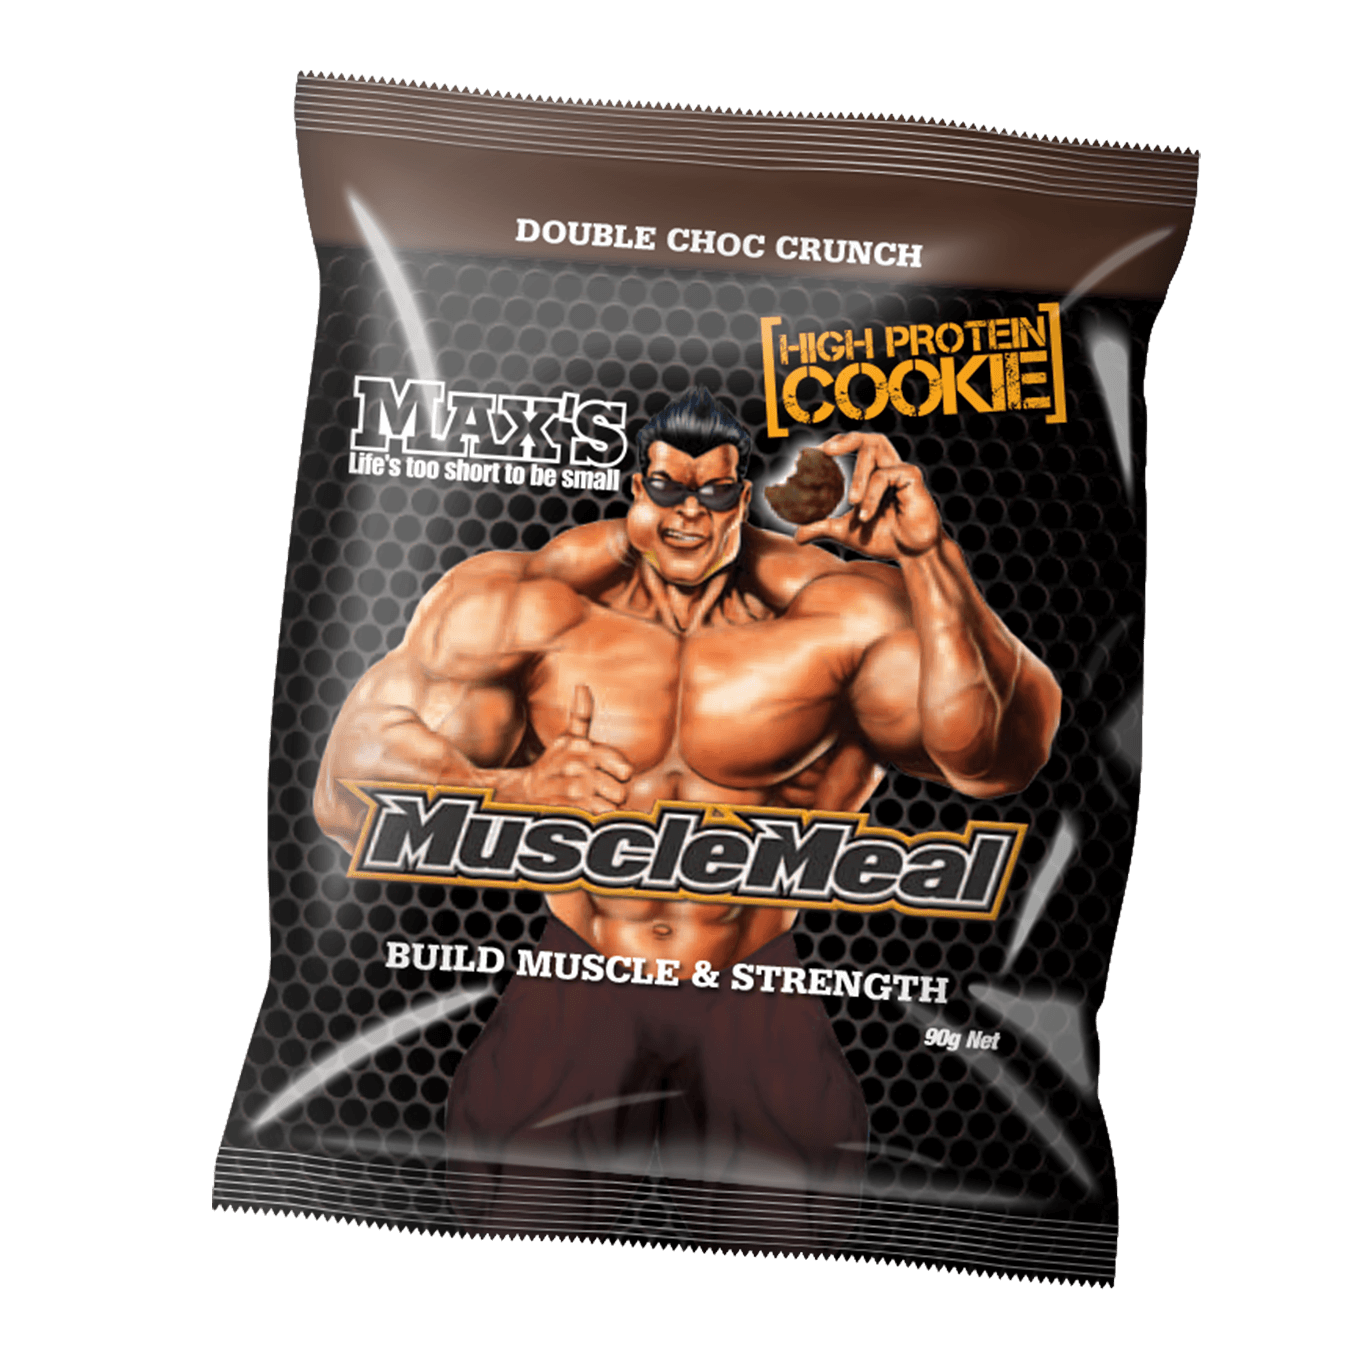 Maxs Muscle Meal Cookies